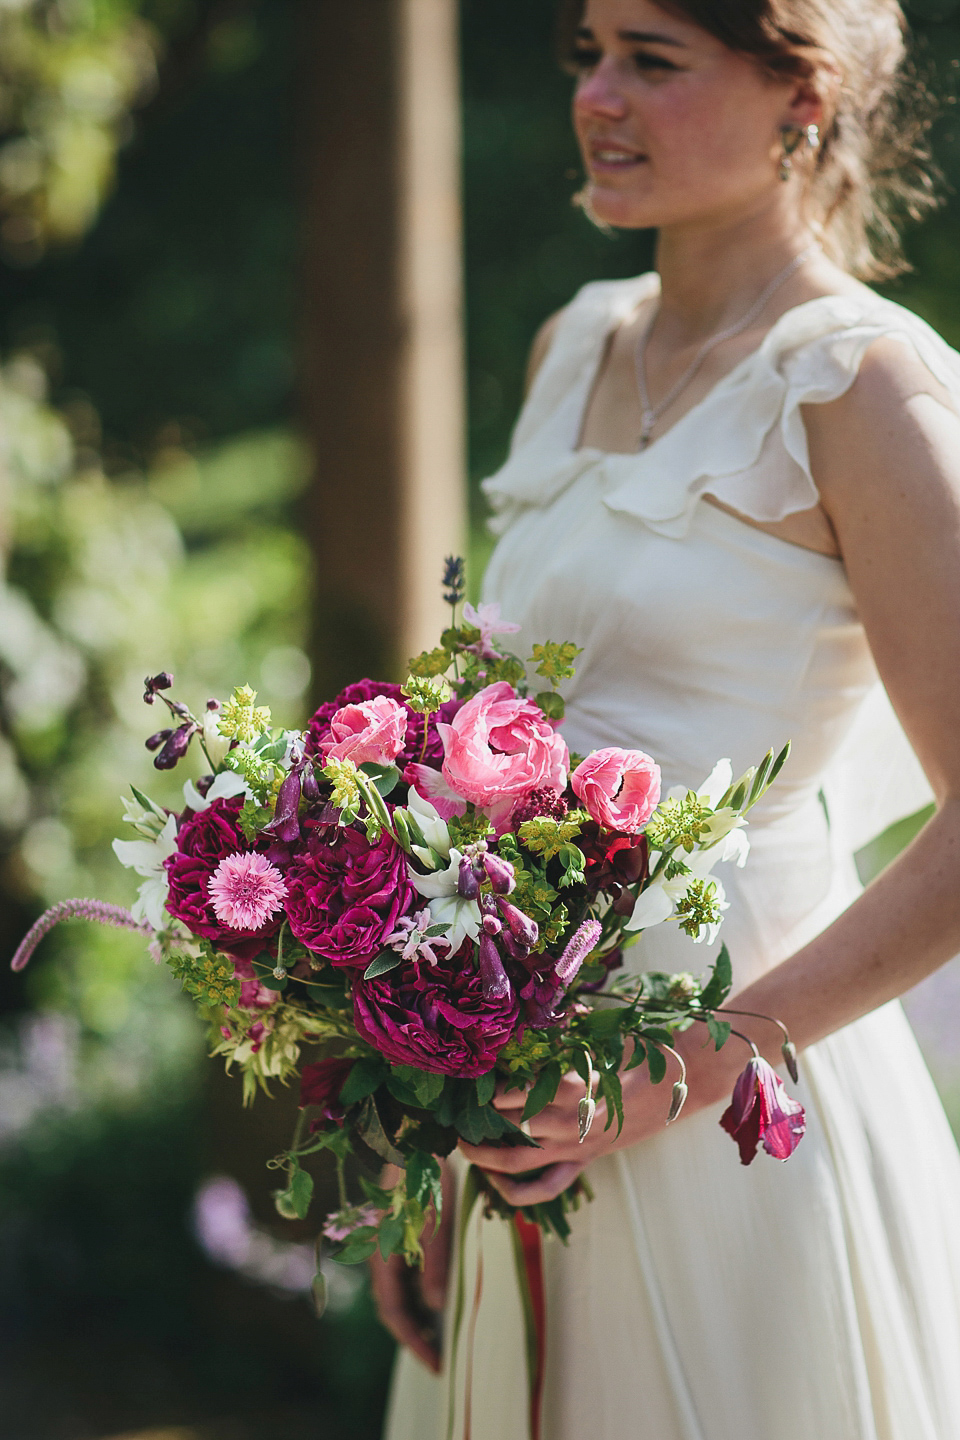 English country garden wedding elegance at Mapperton Gardens. Gowns by Belle & Bunty and floral styling by the wonderful Charlie Ryrlie of The Real Cut Flower Garden. Photography by Helen Lisk.